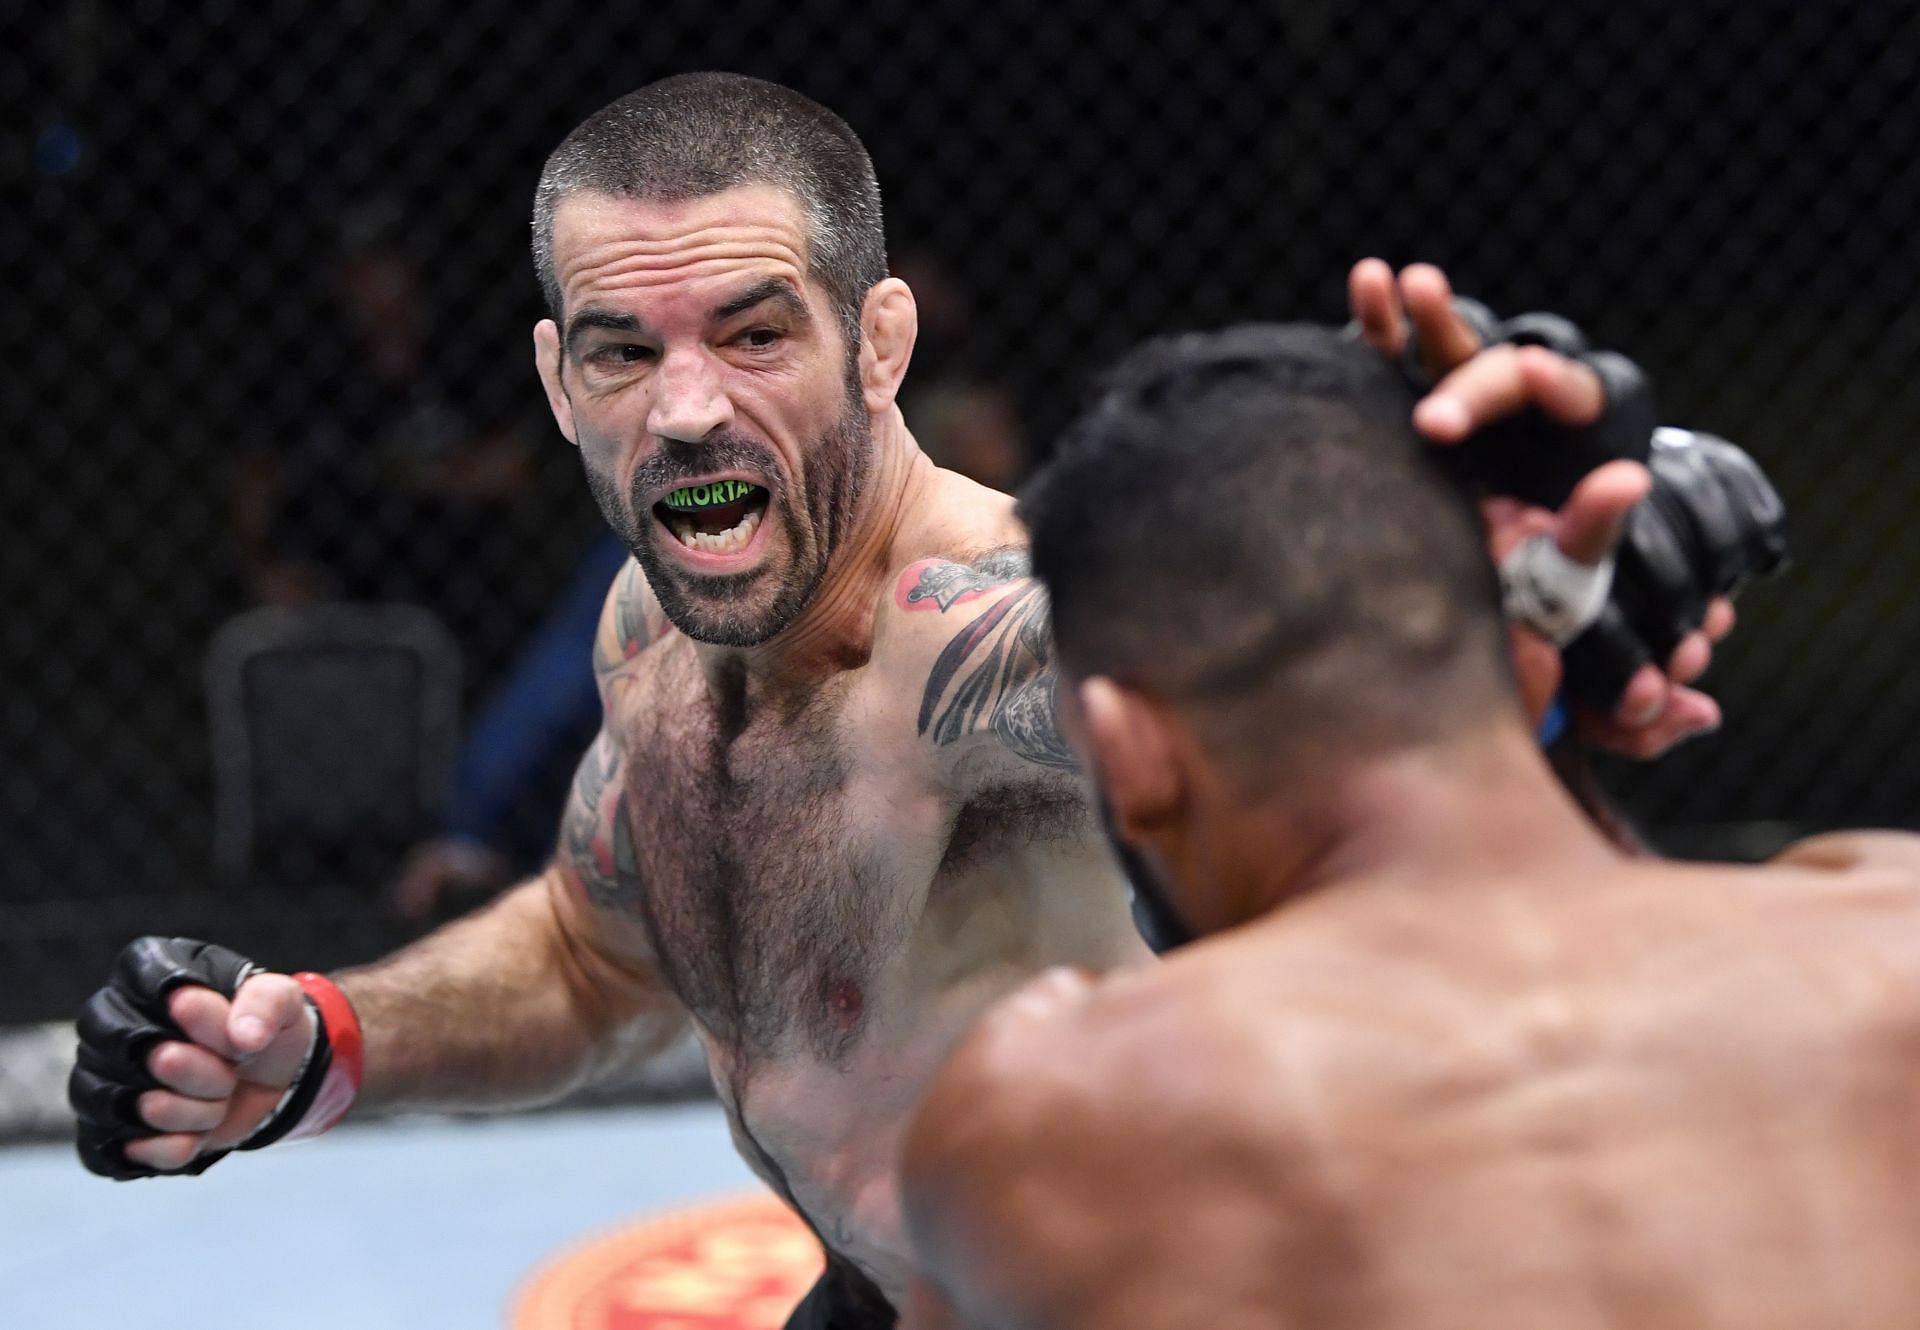 Matt Brown lost to Bryan Barberena in his most recent fight